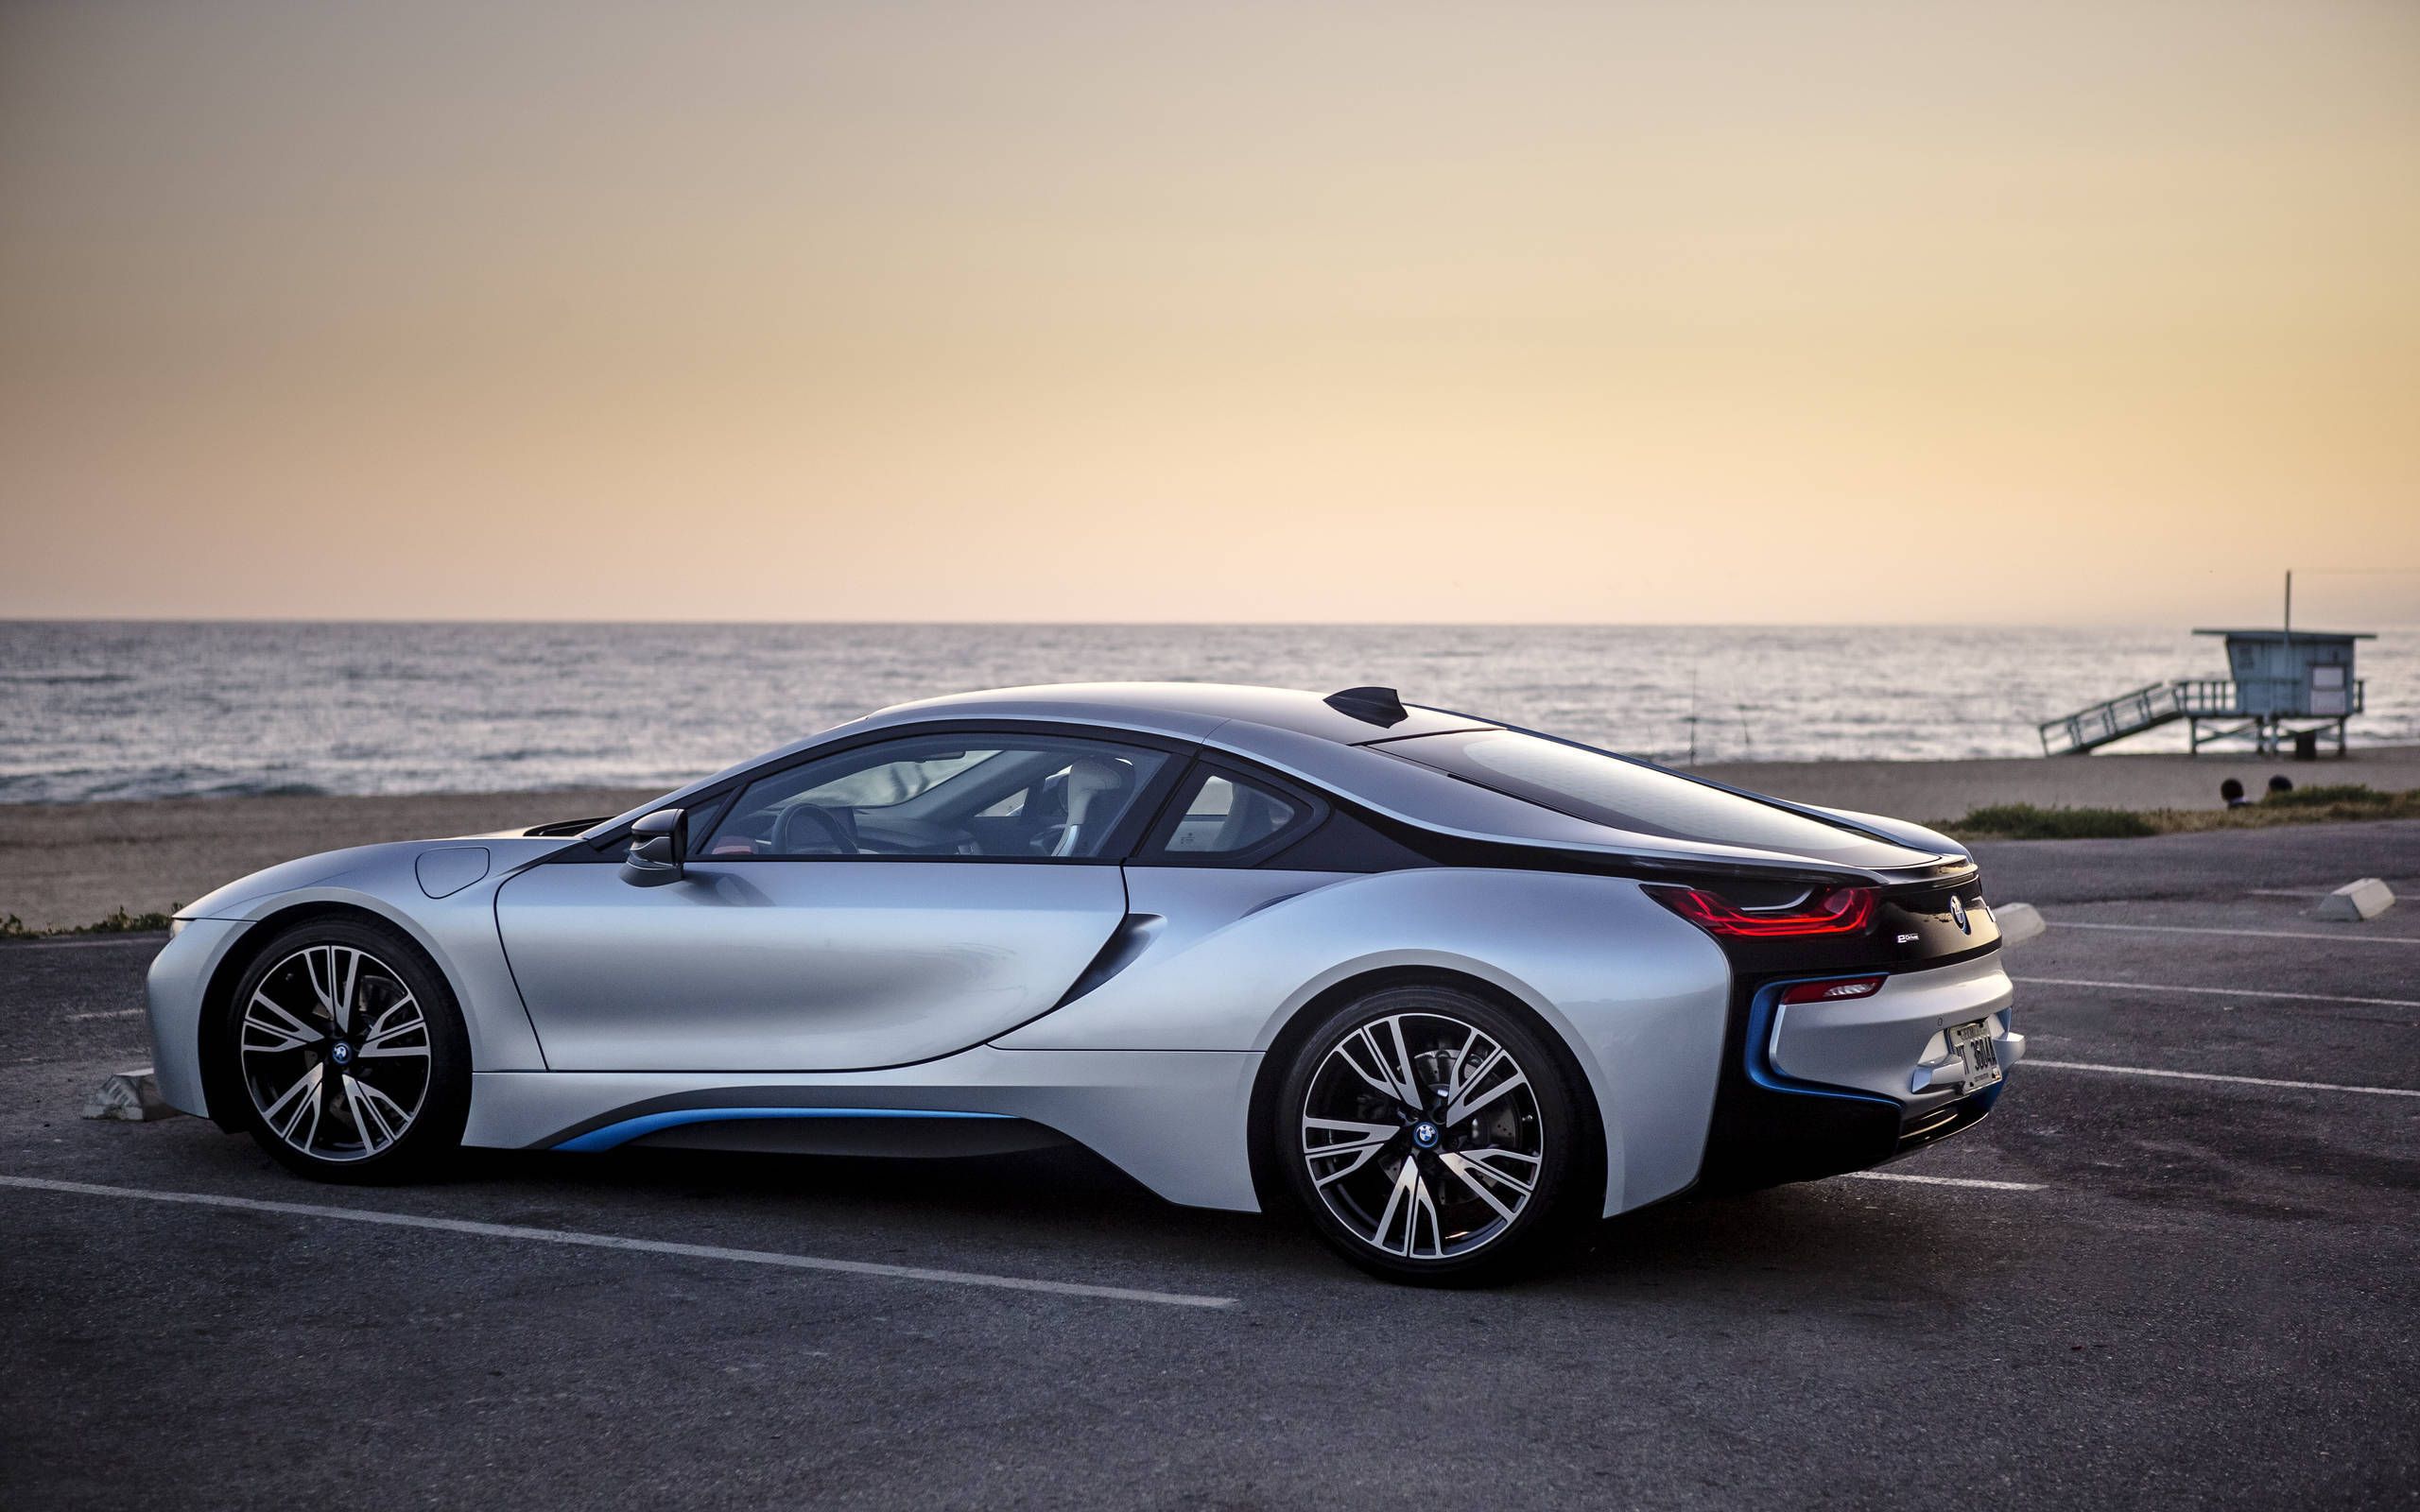 BMW i8 review: A green compromise?